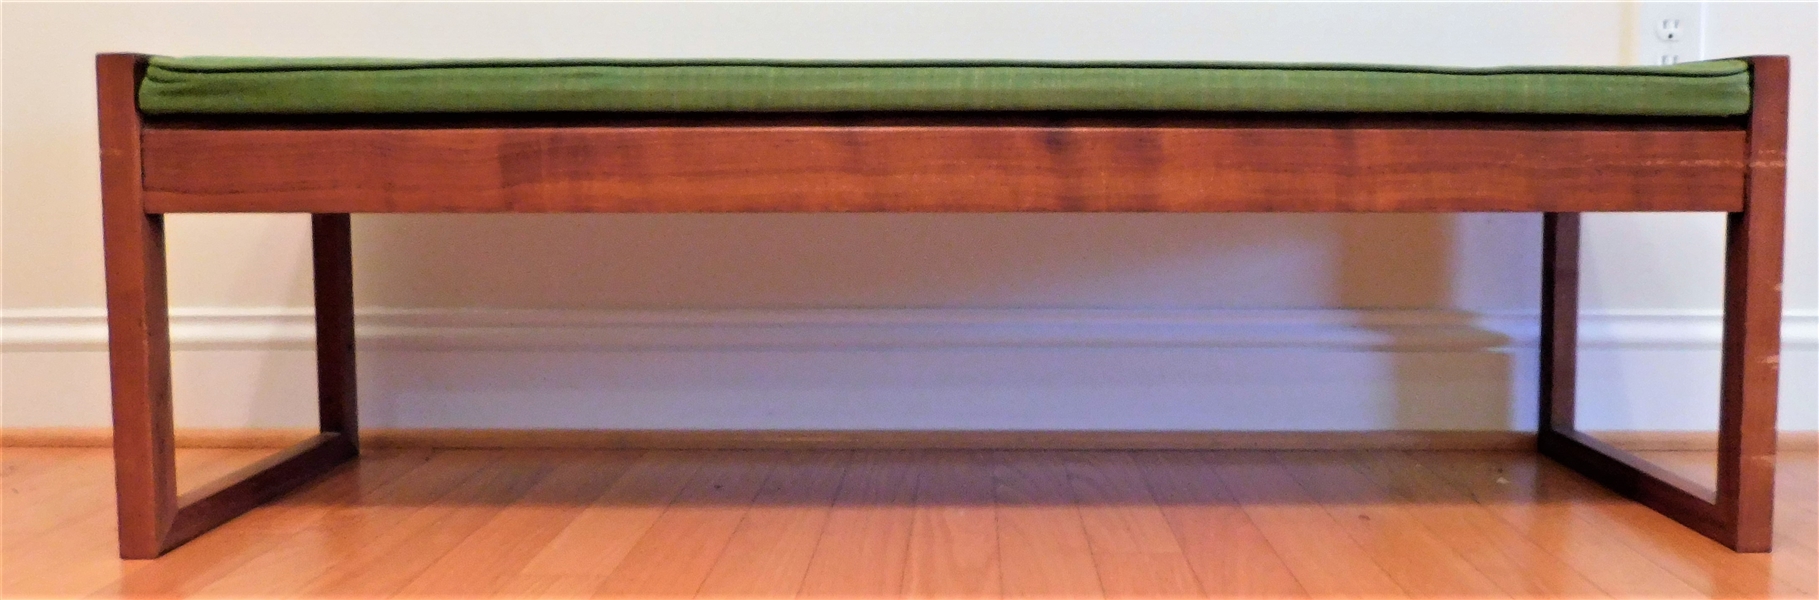 Brown Saltman Furniture Co. Lift Top Light Olive Bench - 15 1/2" tall 53" by 14" - Tag Dated 1966 Mid-Century Modern